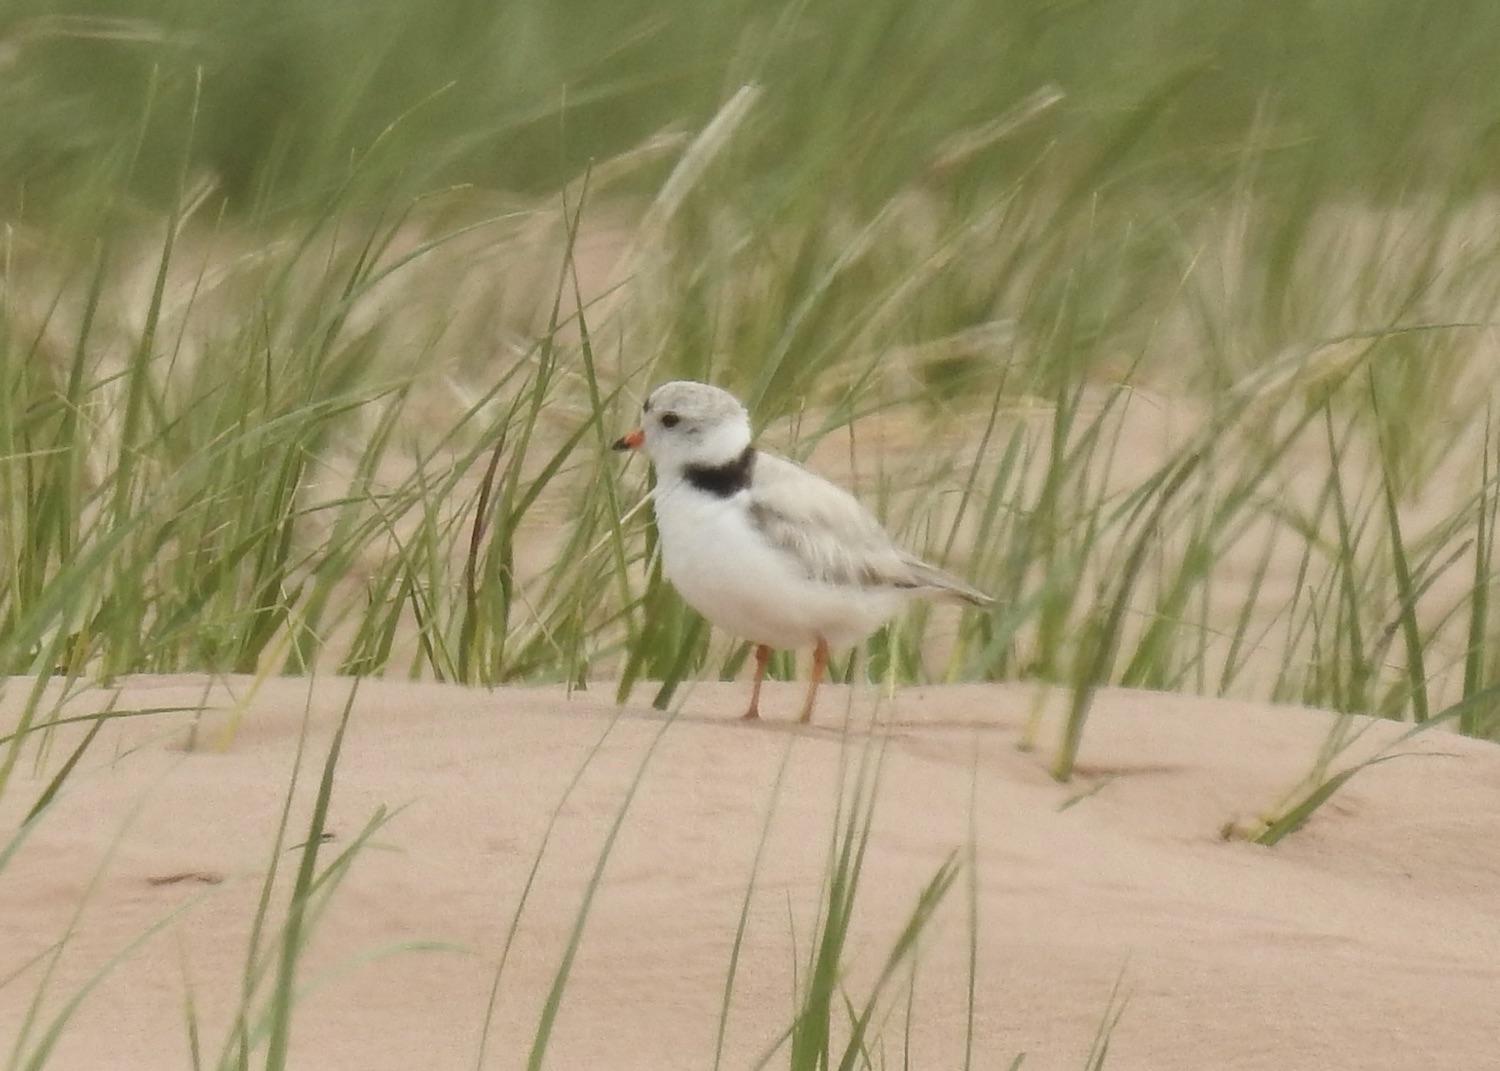 Piping Plovers are endangered migratory shorebirds that are protected in Canada and in Prince Edward Island National Park.